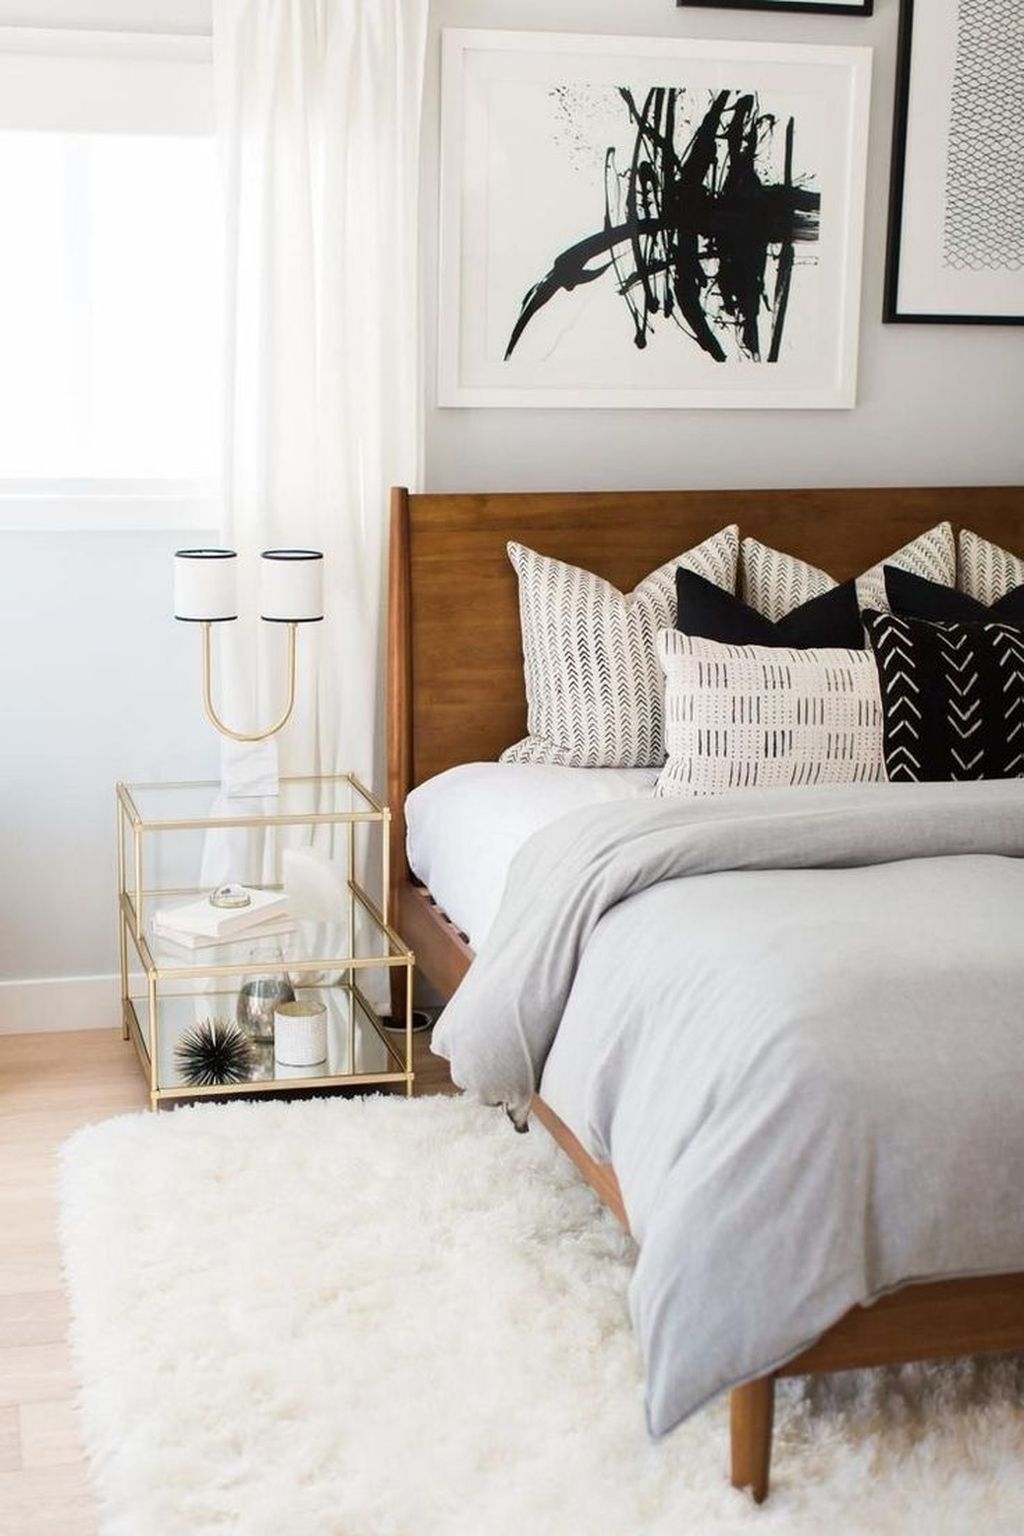 Affordable Rug Bedroom Decor Ideas To Try Right Now 27